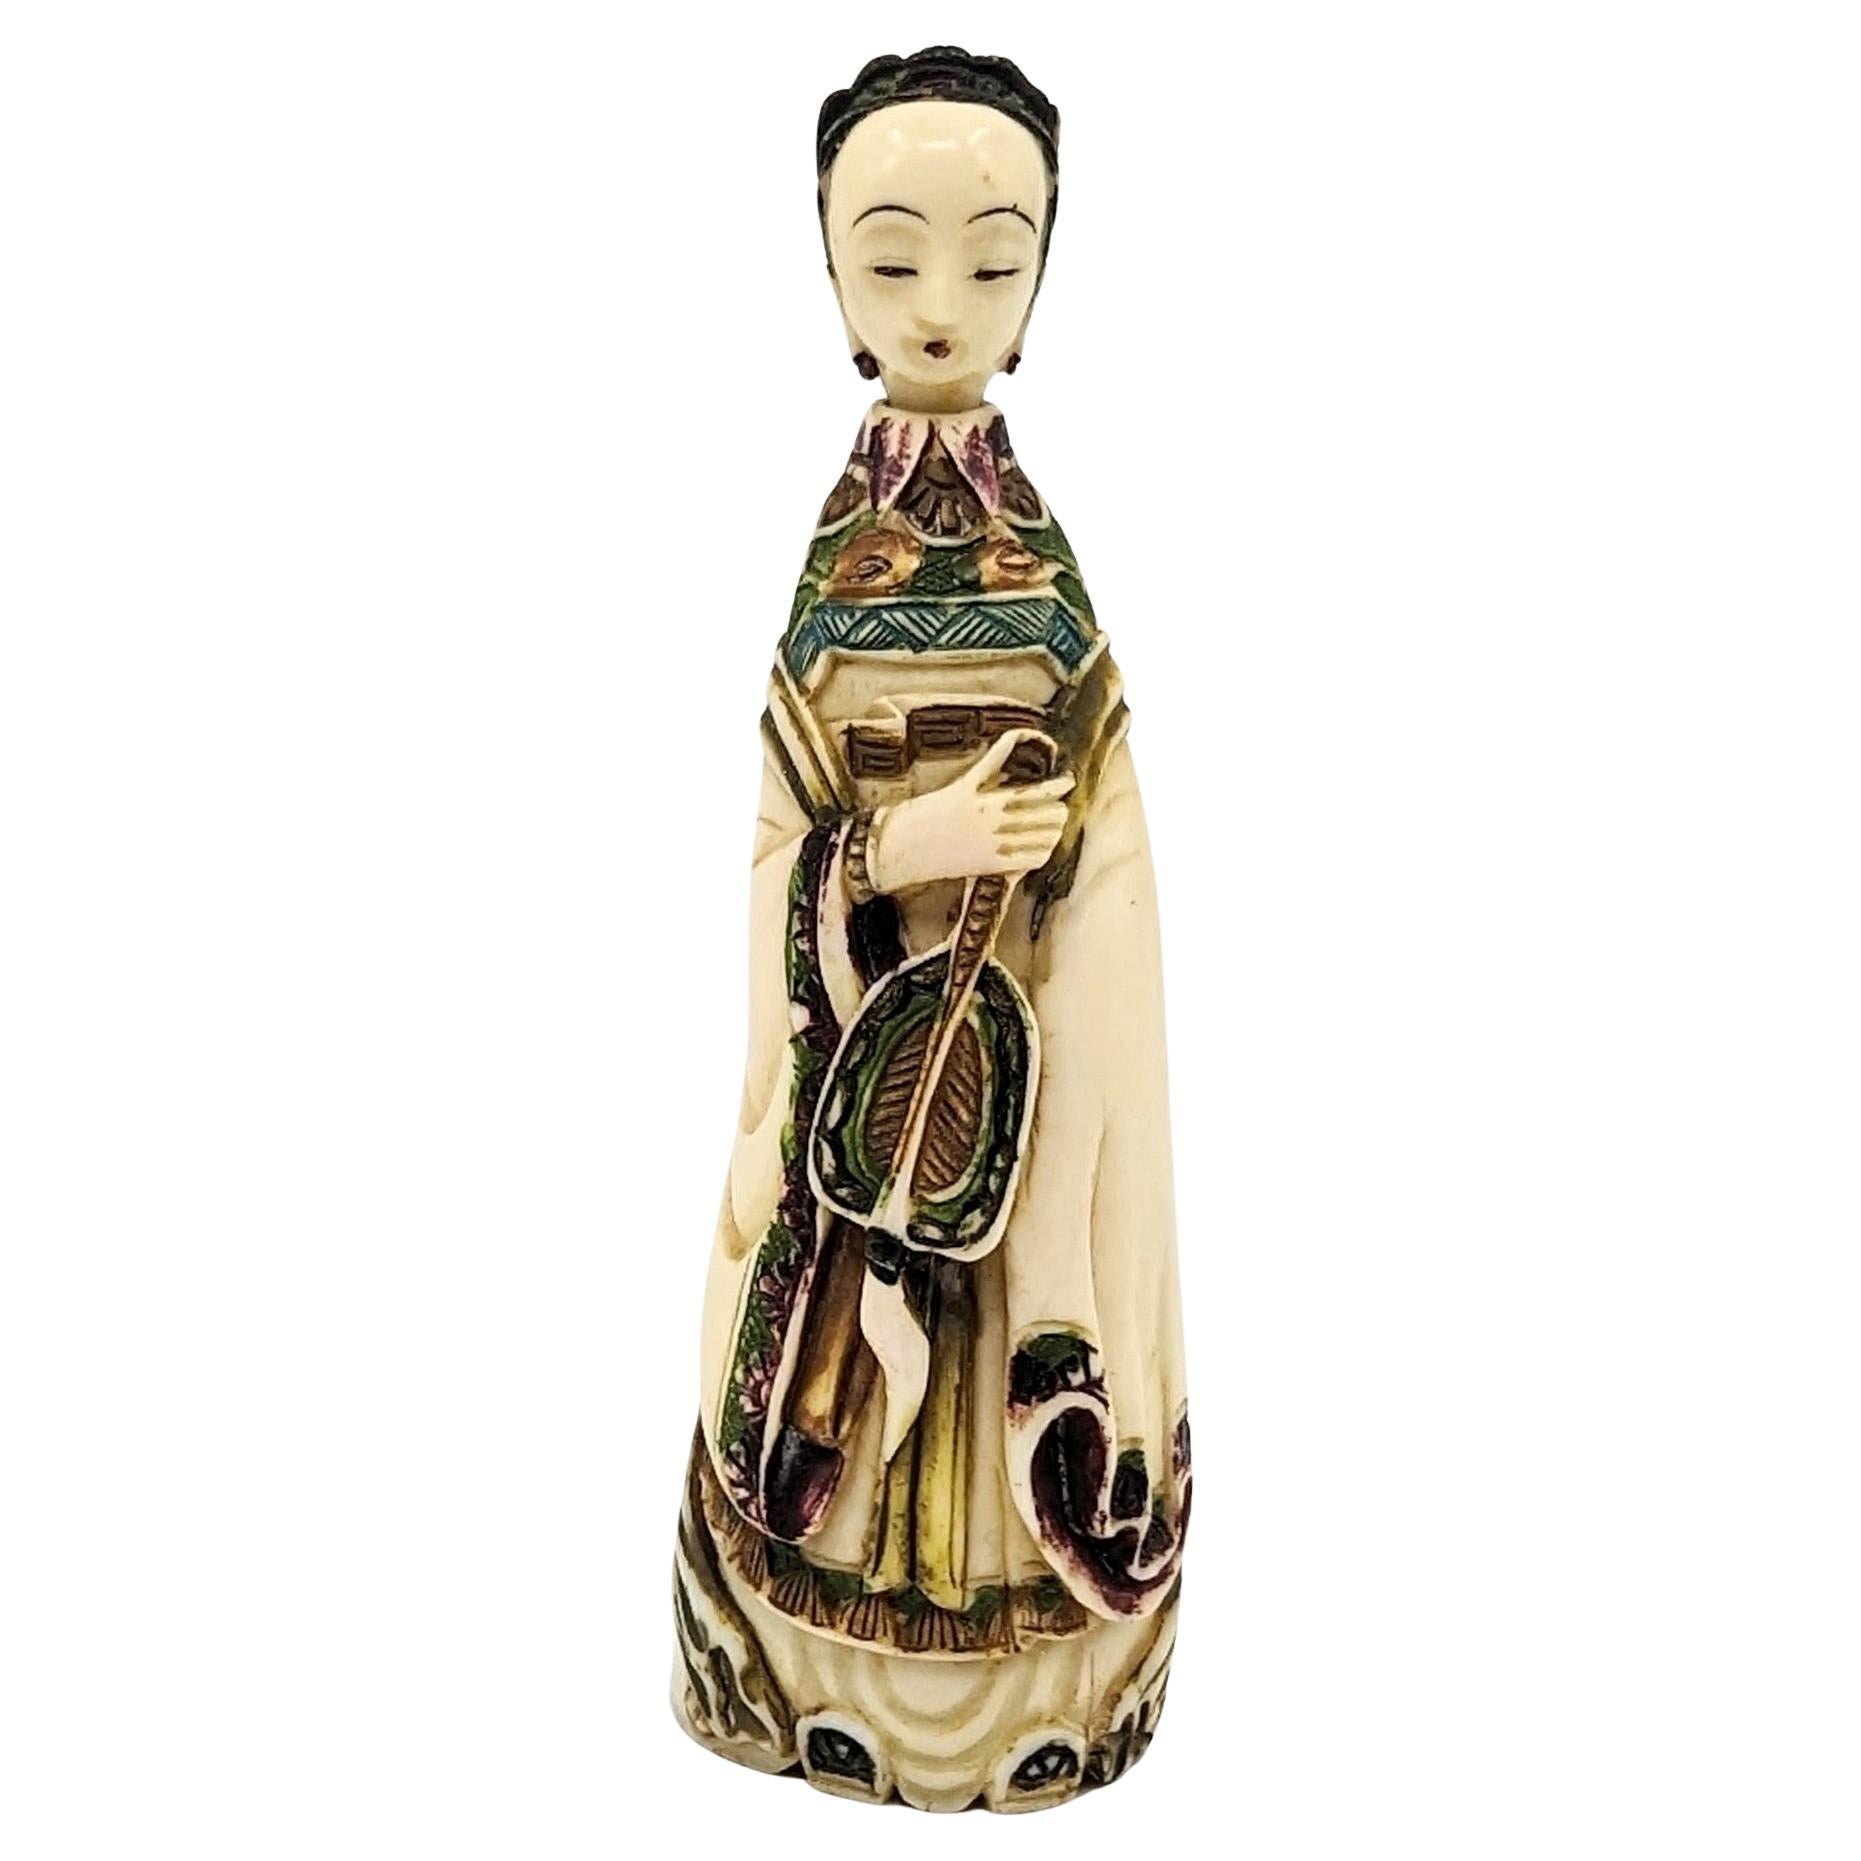 Antique and tastefully carved natural material Chinese snuff bottle in the form of a well dressed court lady holding a fan. The lady figure holds a peaceful and meditative smile, with eyes semi-closed, and thin lips glossed in purple, matching